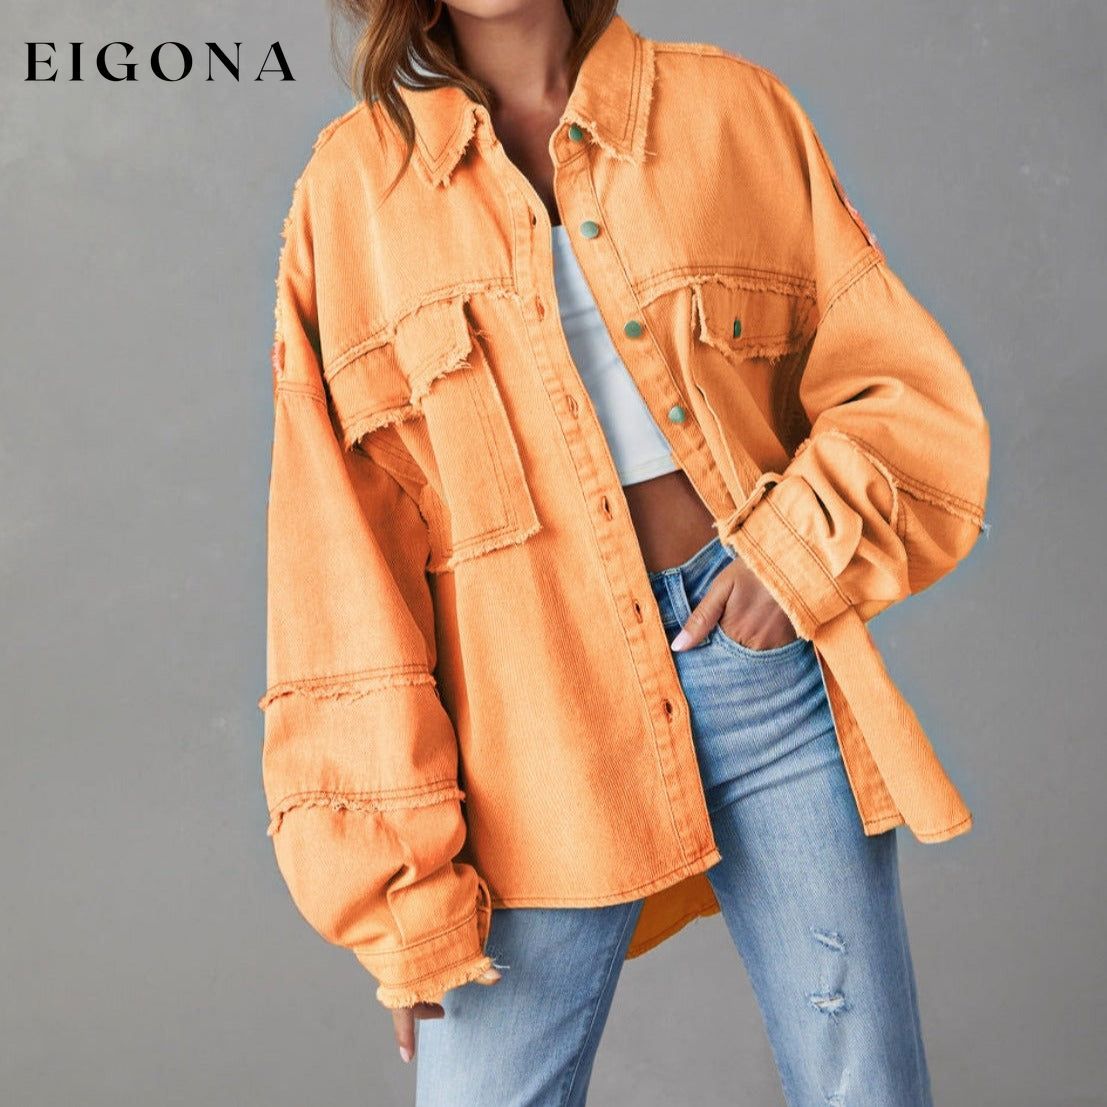 Dropped Shoulder Raw Hem Jacket Sherbet clothes Denim Jacket Jacket long sleeve top Outerwear Ship From Overseas Shipping Delay 09/29/2023 - 10/02/2023 X@Y@K